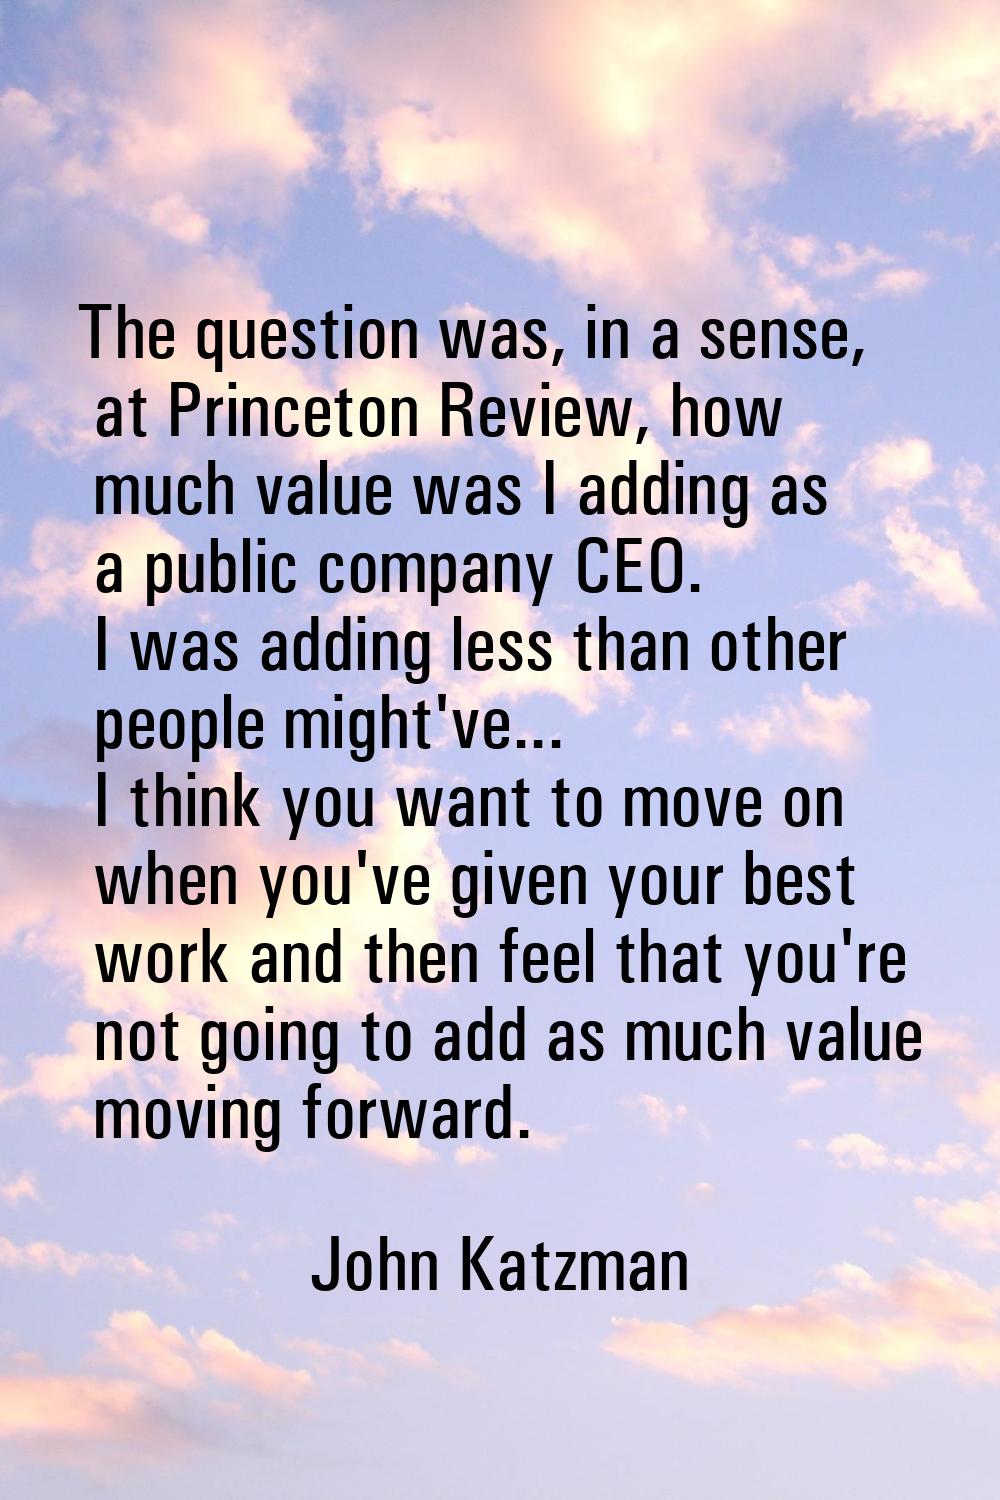 The question was, in a sense, at Princeton Review, how much value was I adding as a public company 